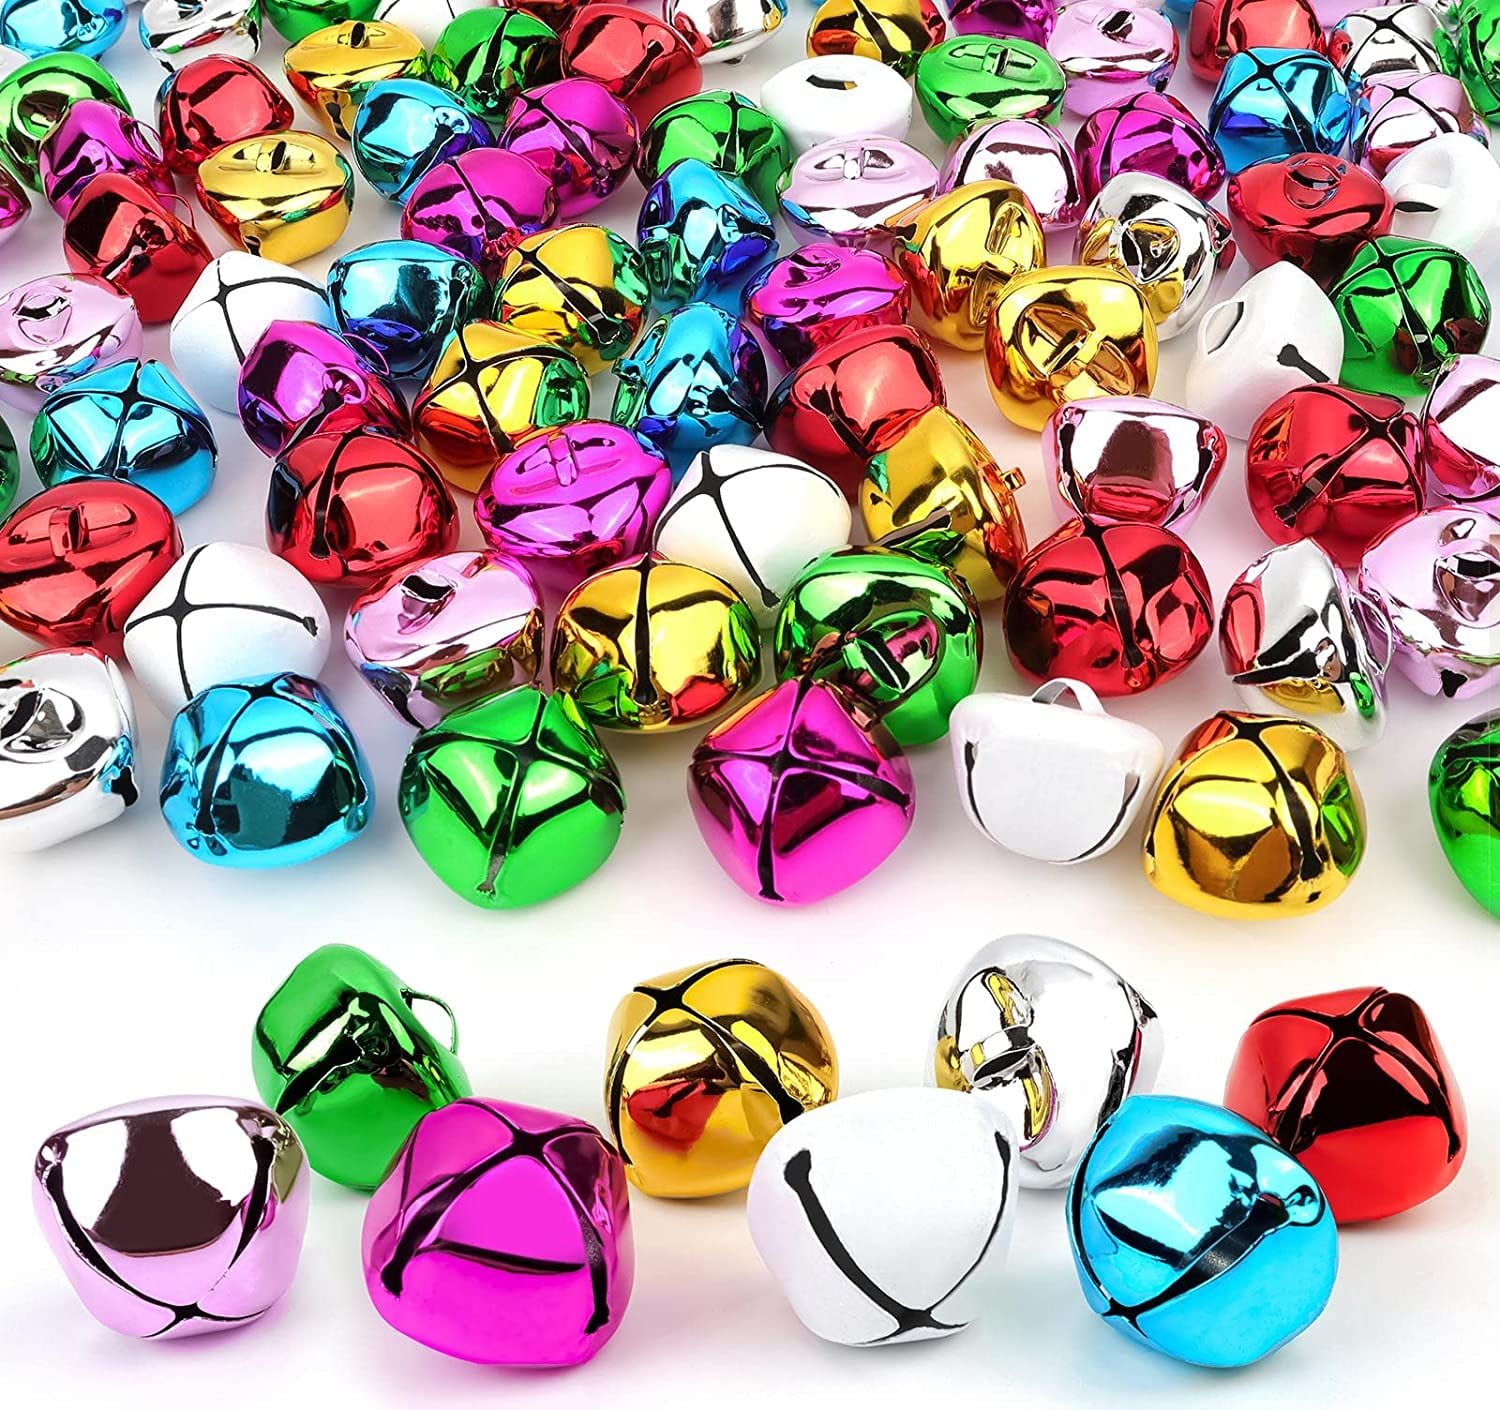 Jingle Bells for Crafts,1 Inch Large Multicolored Jingle Bells Bulk, 8  Colors Decorative Bells for DIY Christmas Festival Home Wreath Decorations,  50 Pcs 